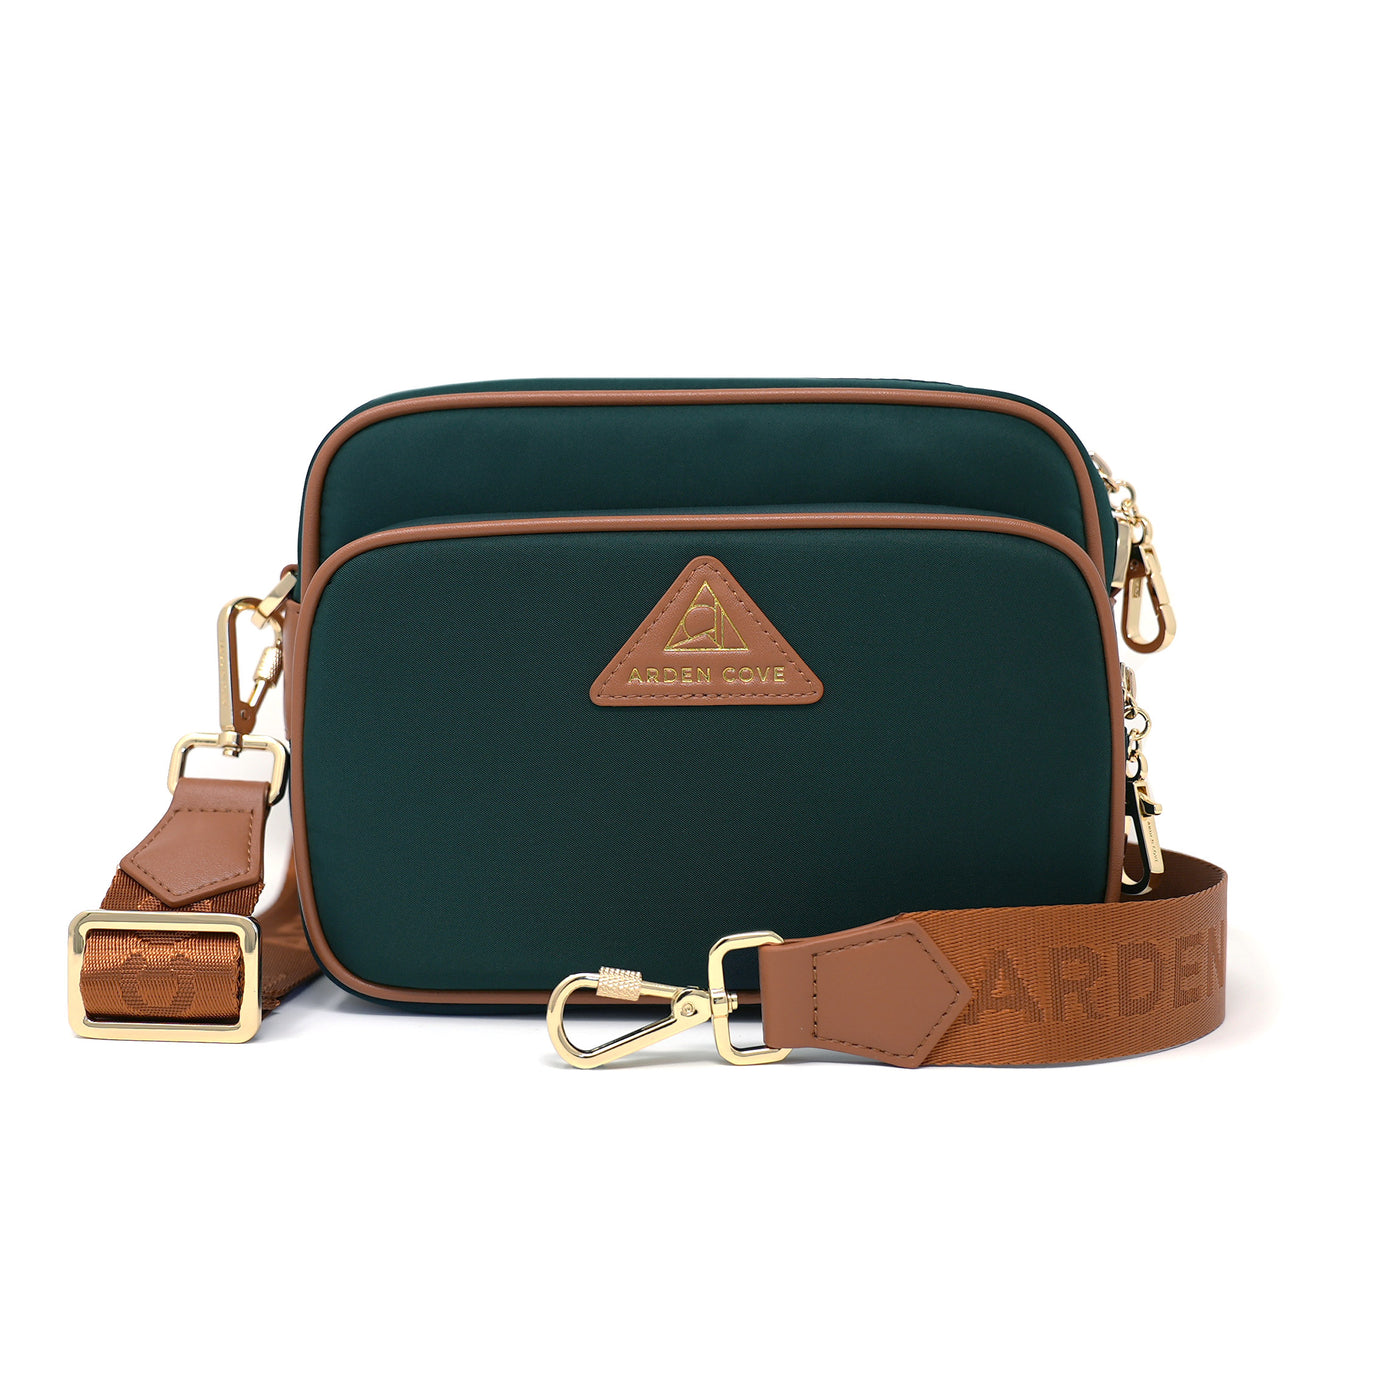 Anti-theft Water-resistant Travel Crossbody - Crissy Full Crossbody in Forrest Green Gold with nylon jacquard locking clasps straps - front view - Arden Cove